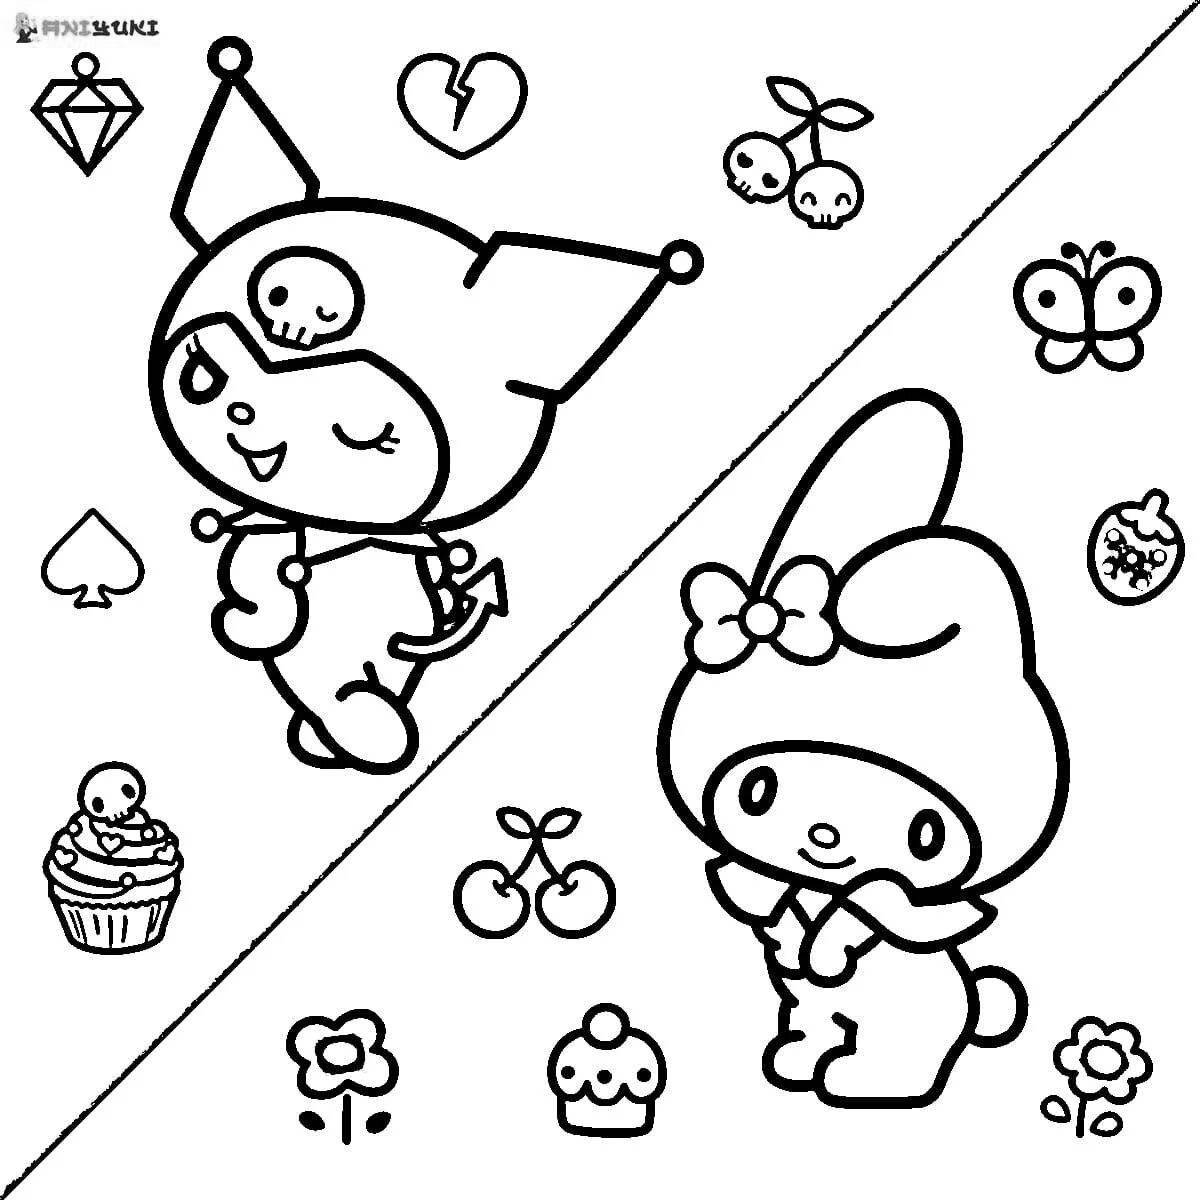 Coloring cute hello kitty chicks